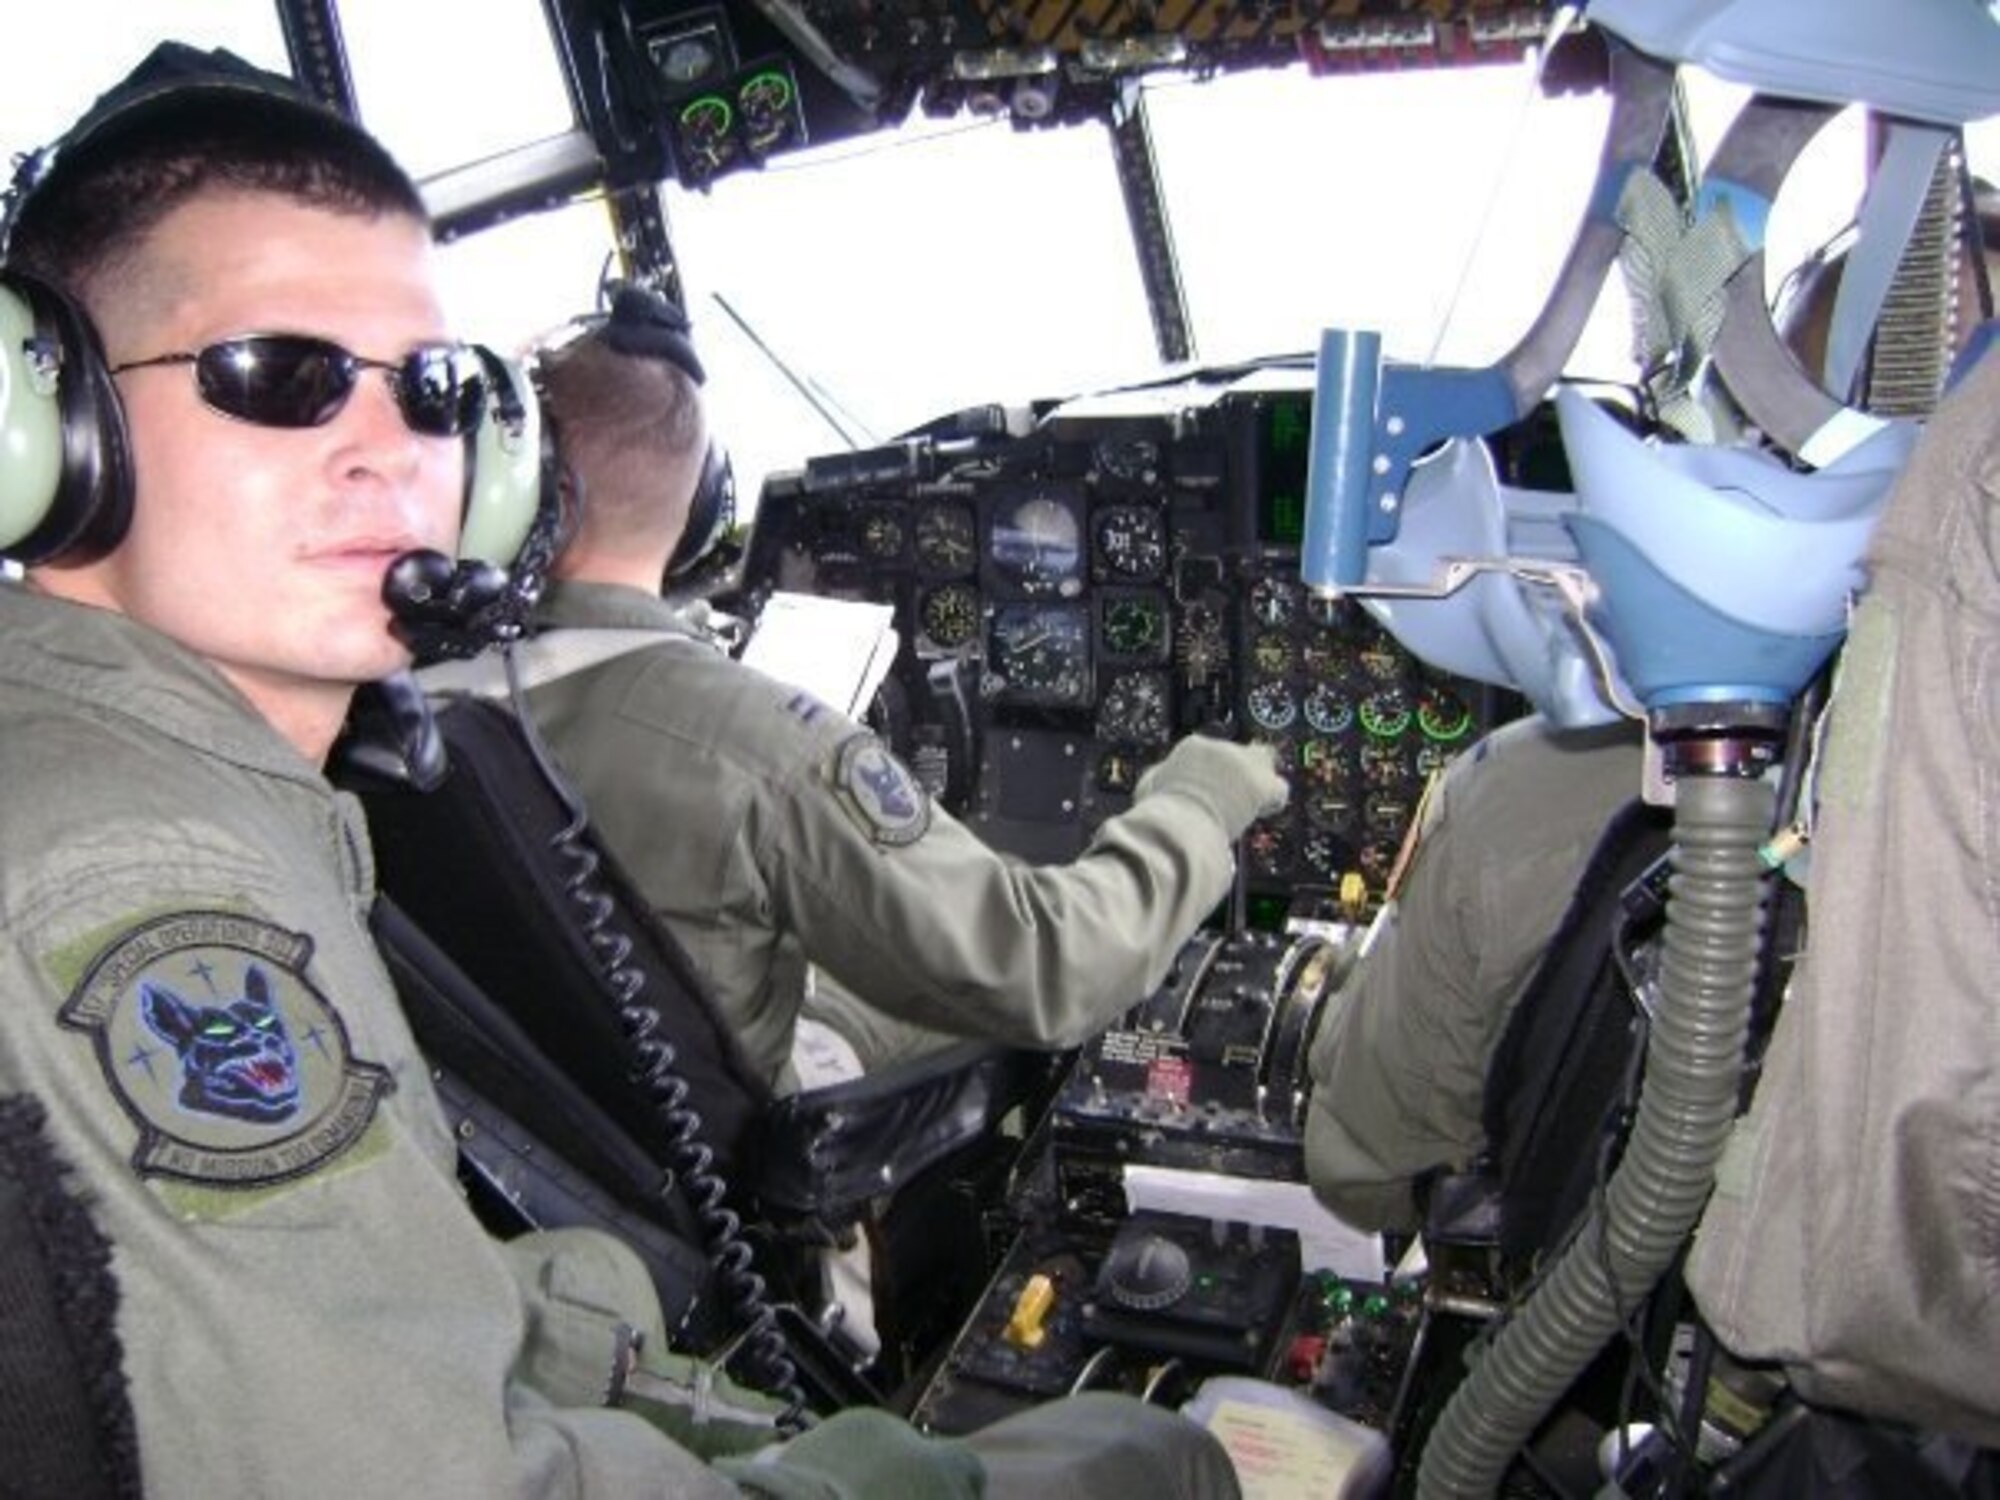 U.S. Air Force Chief Master Sgt. Tony Jenkins, 33rd Operations Group superintendent, pictured as a Staff Sgt., sits in the flight deck of an MC-130 during a local training sortie May 2005, near Japan. After spending several years as an aircraft communication and navigation systems specialist, Jenkins cross-trained to become a flight engineer. (Courtesy photo)